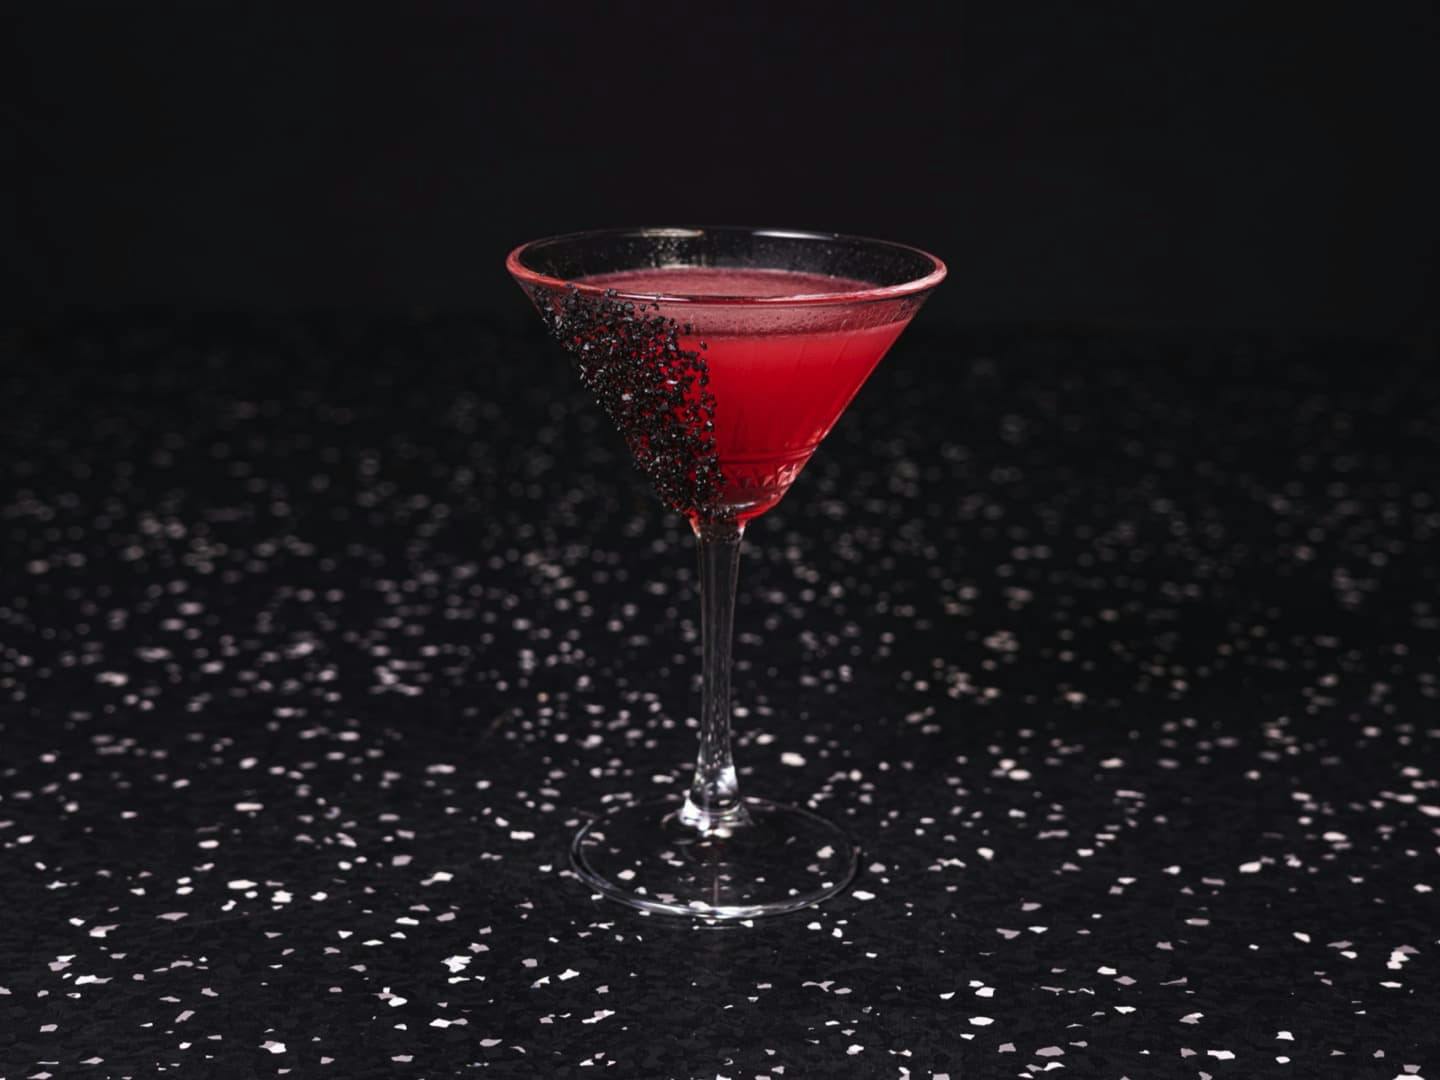 <p>We took Madame Tequila on a trip trough the tropics</p>
<p>Base: Tequila infused with hibiscus, Cointreau, lime juice and agave</p>